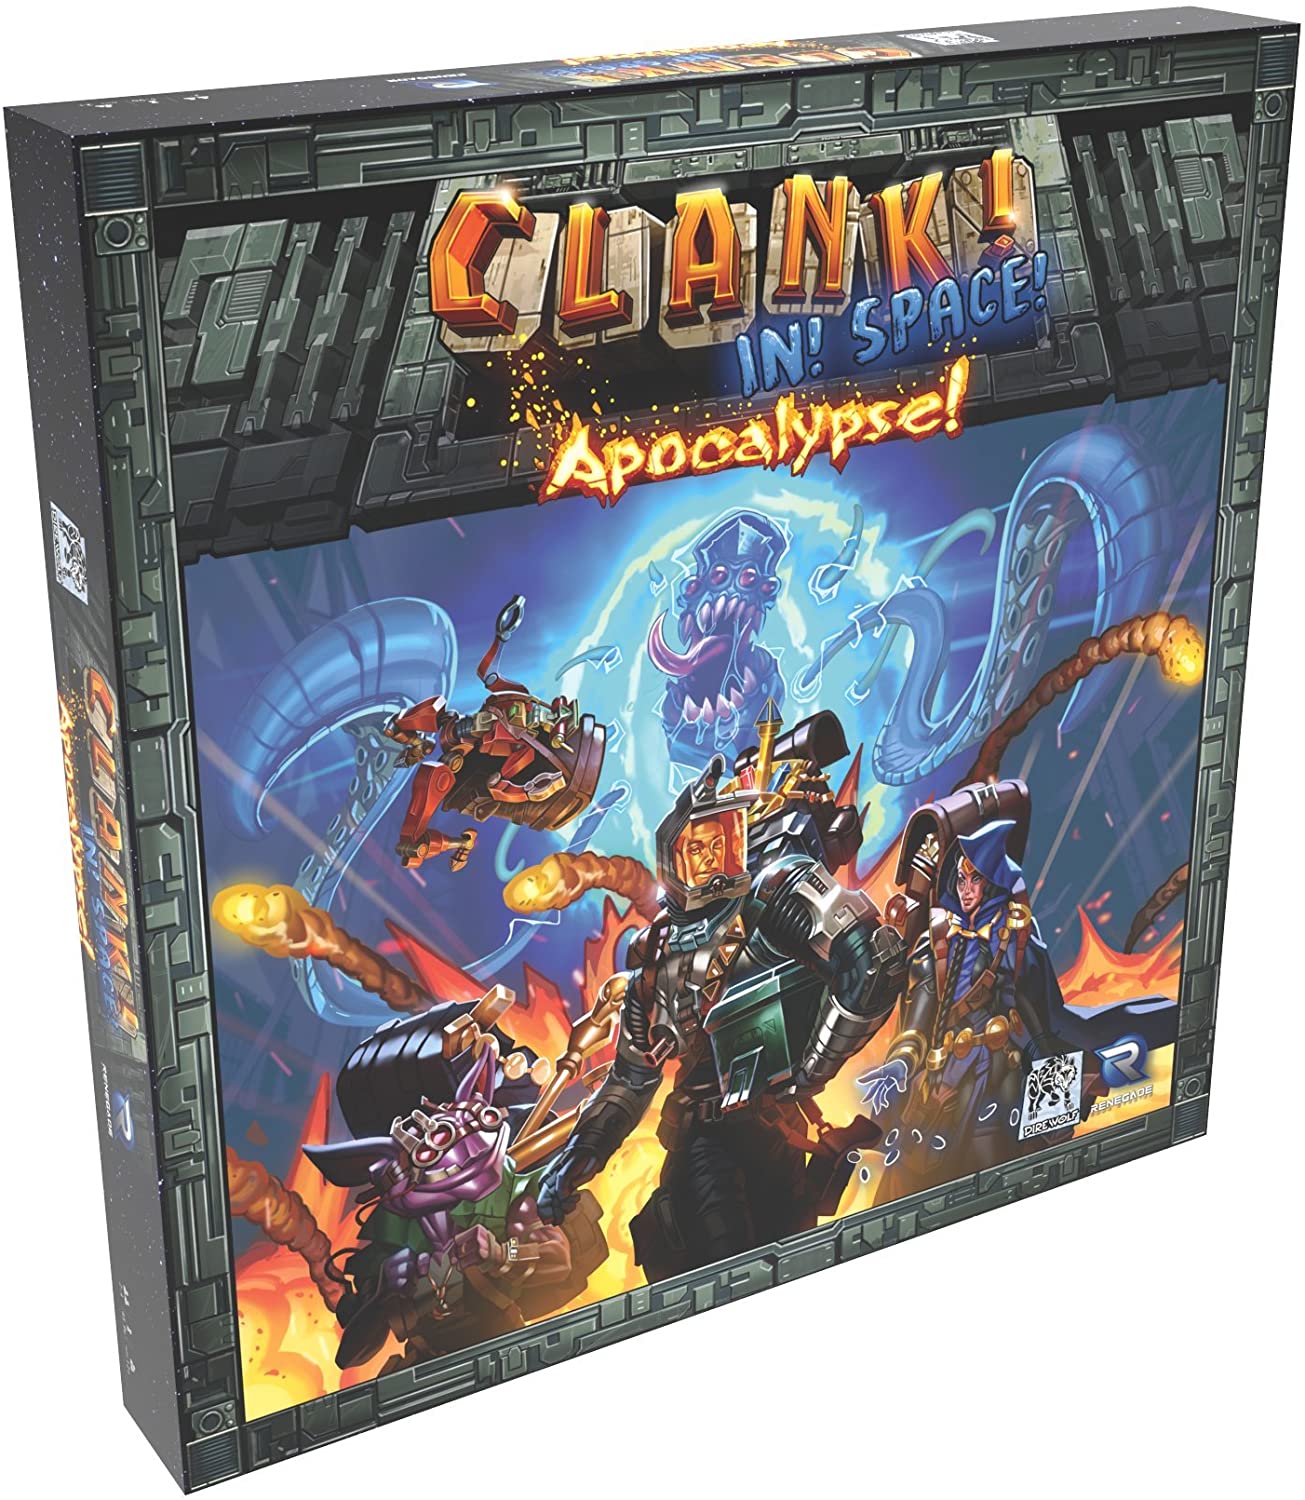 Clank!: In! Space! - Apocalypse!